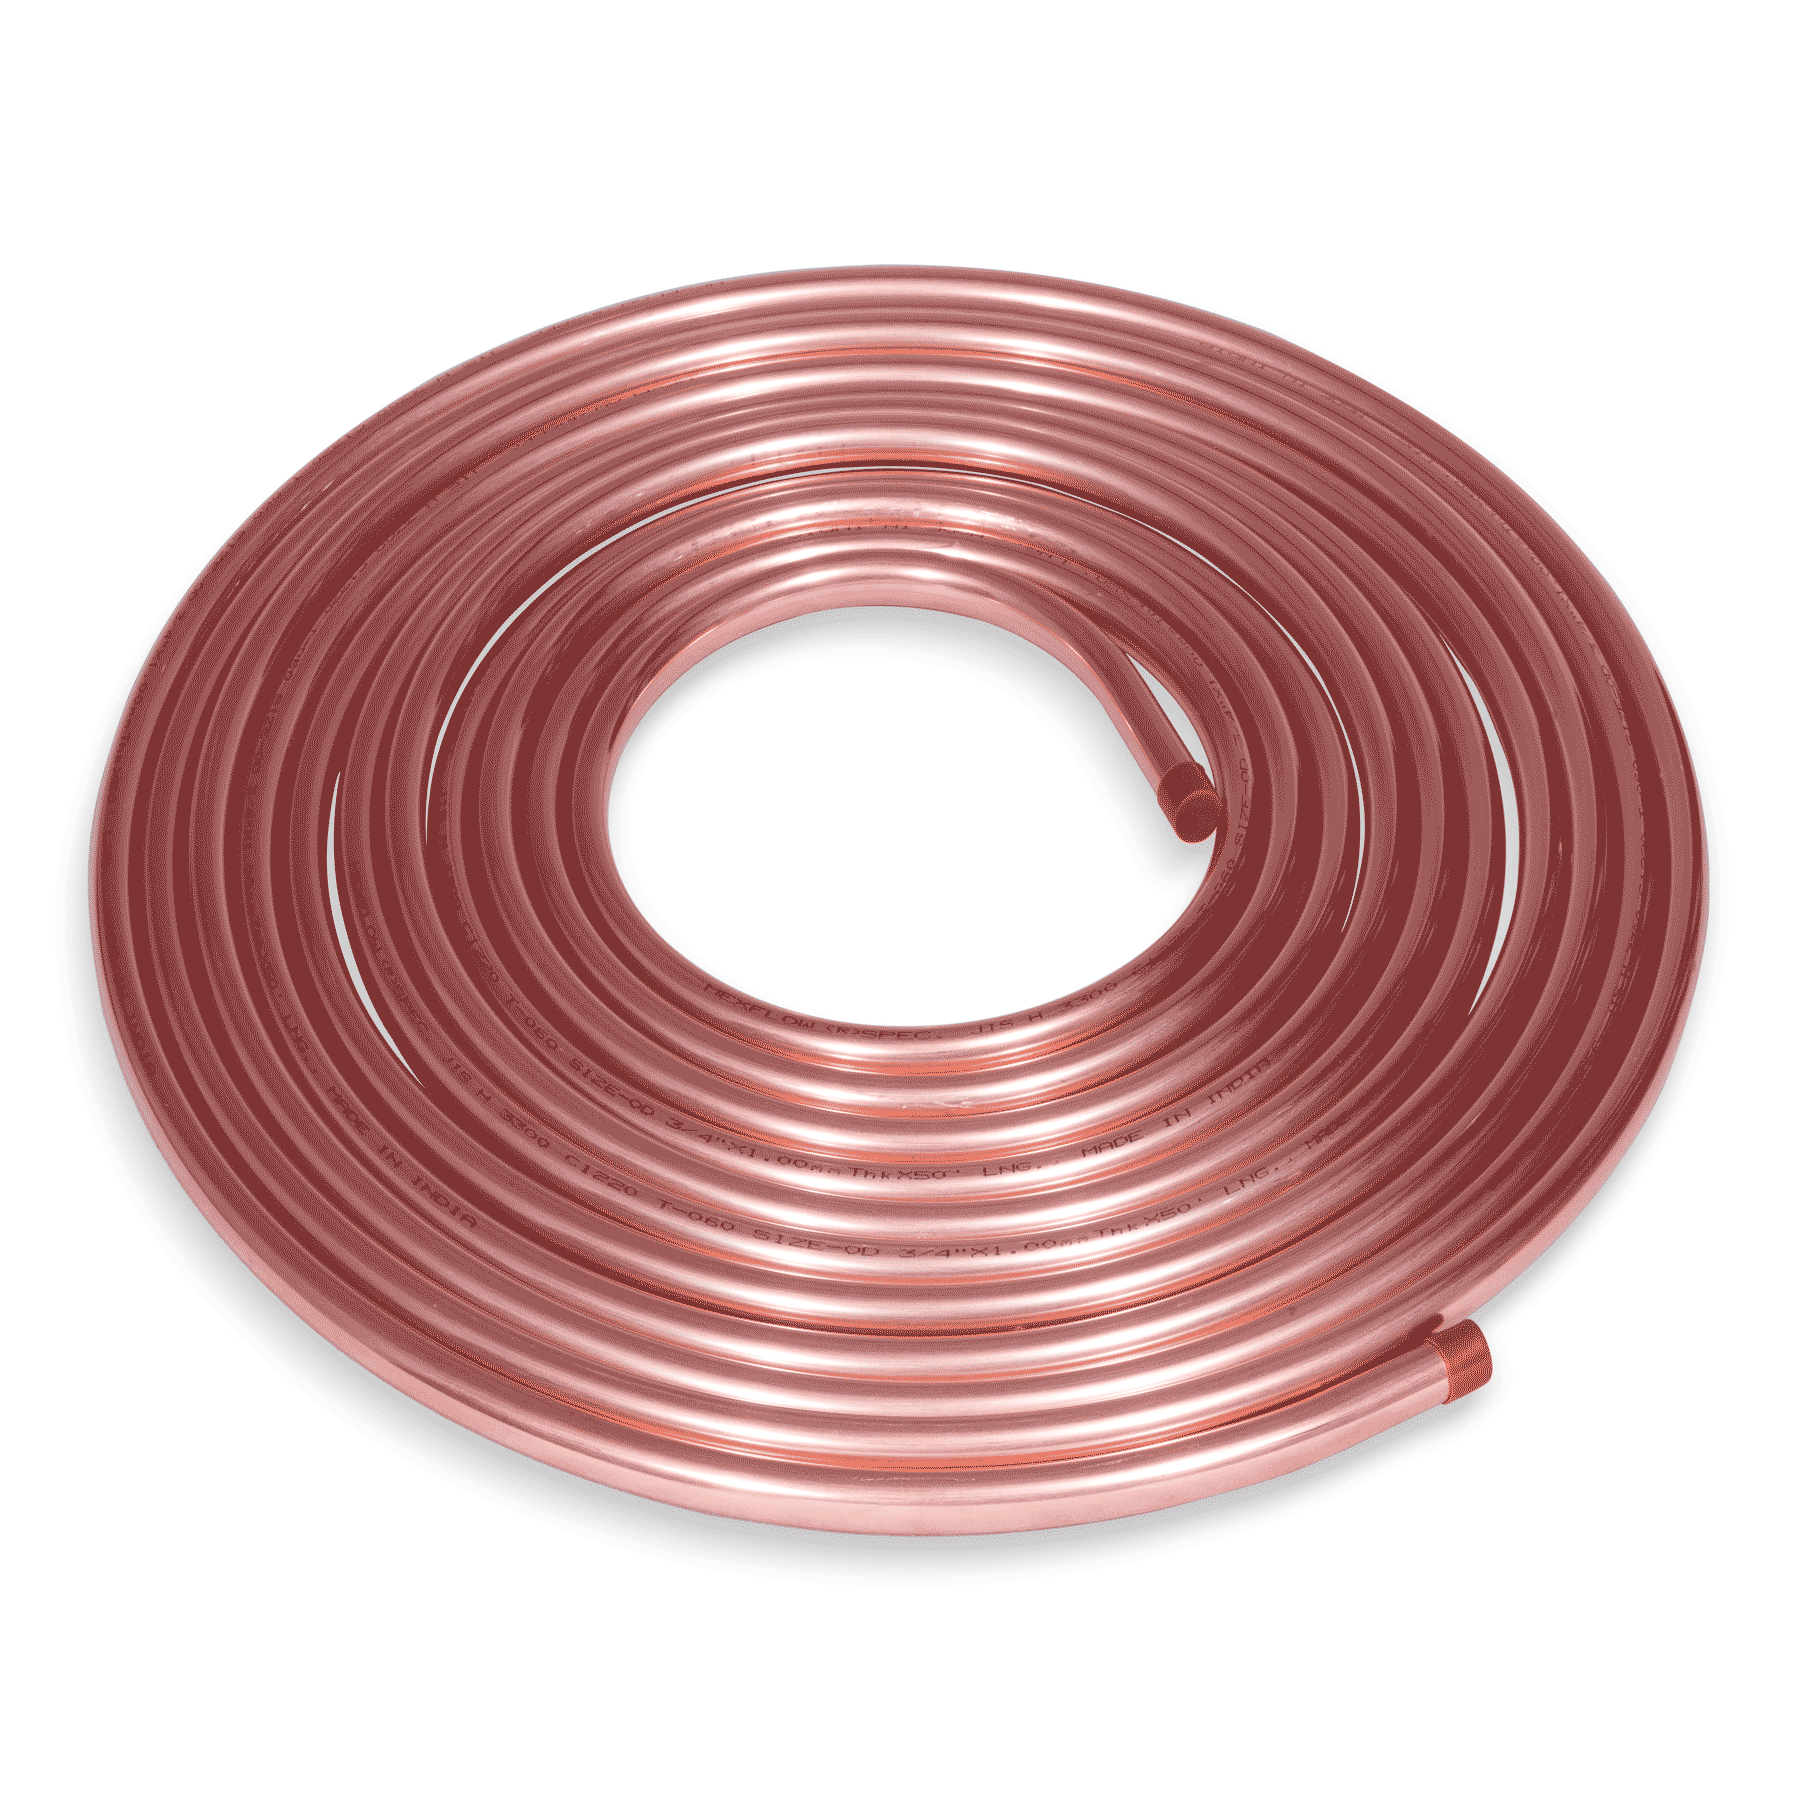 Mexflow PVC Copper Tubes for Instrumentation or Stream Tracing